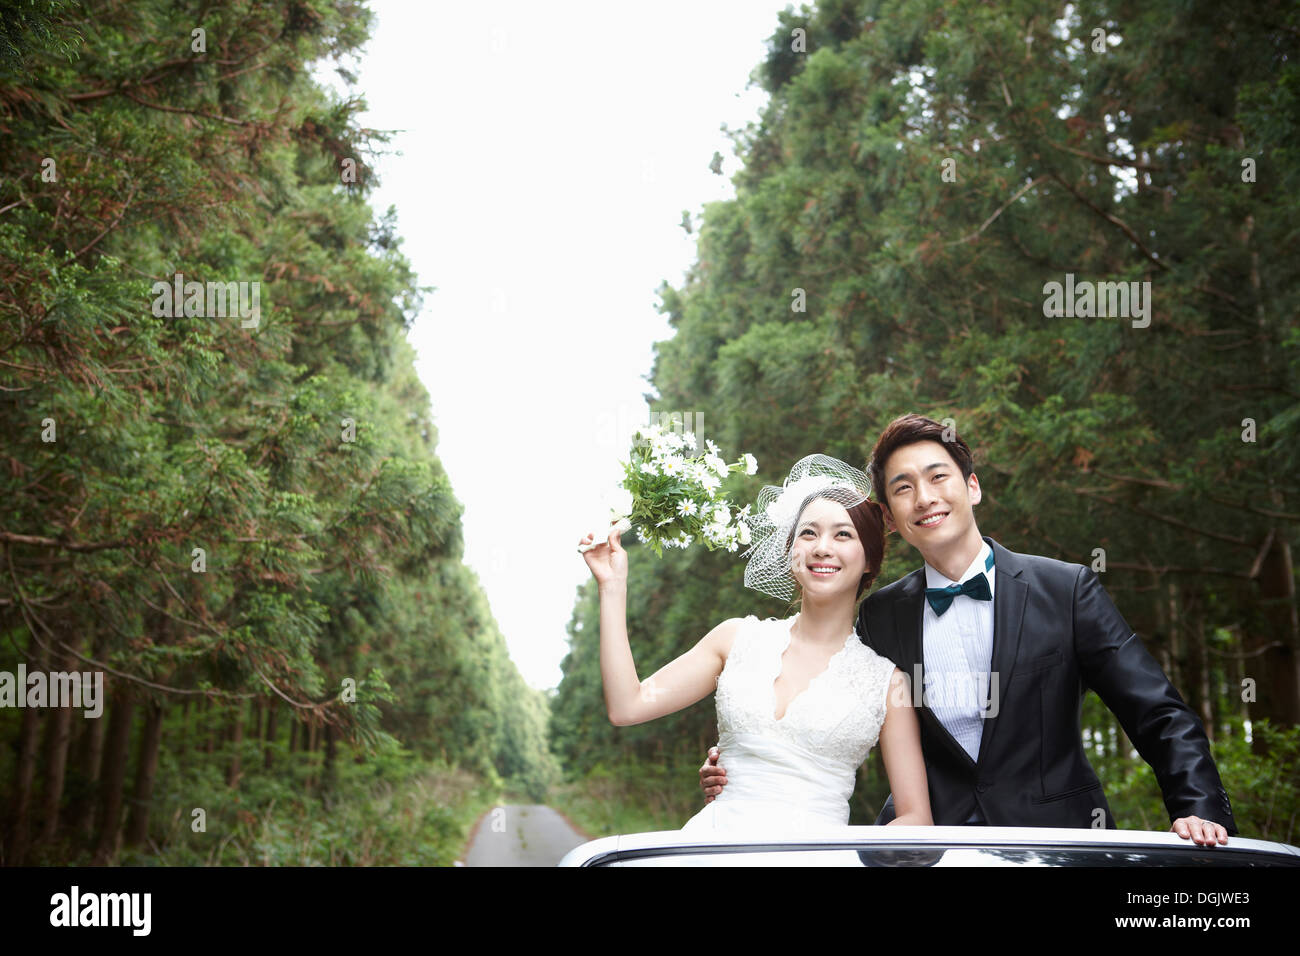 newlyweds in a convertible car Stock Photo